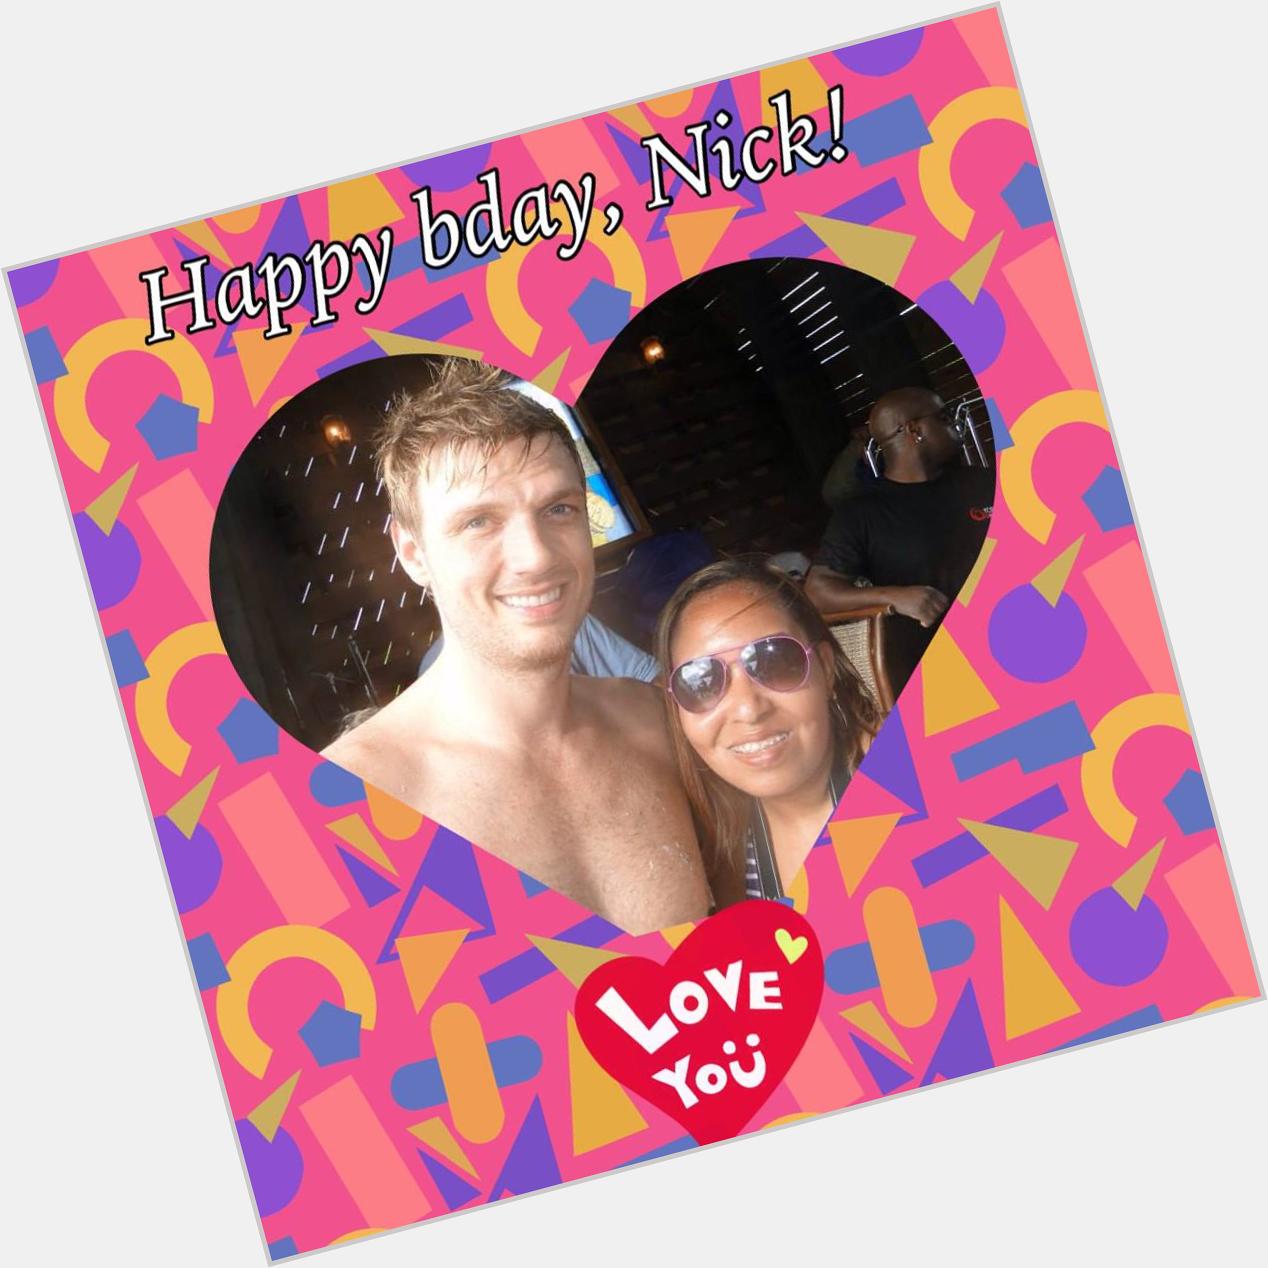  Happy Birthday Nick Carter!!! Wish you all the best always!!!
Julie D® 